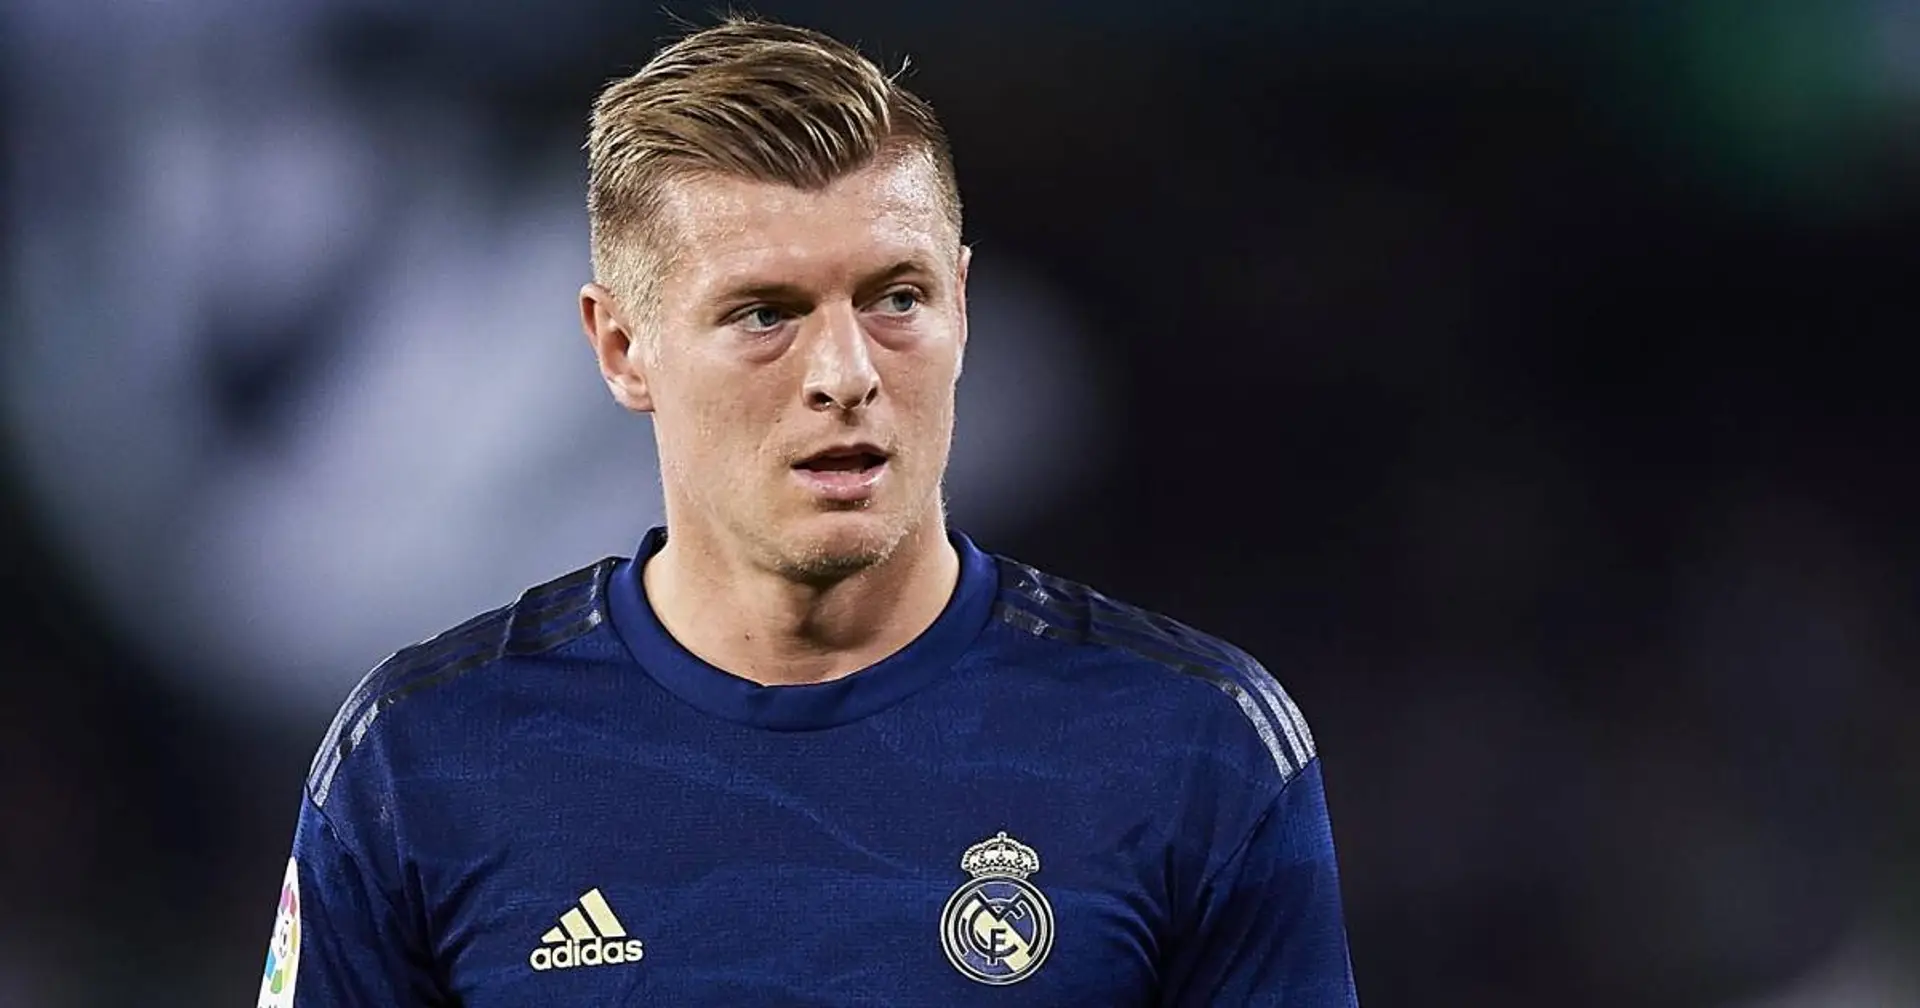 'I was directly a Nazi for many people: blond, blue eyes...': Kroos opens up on online abuse